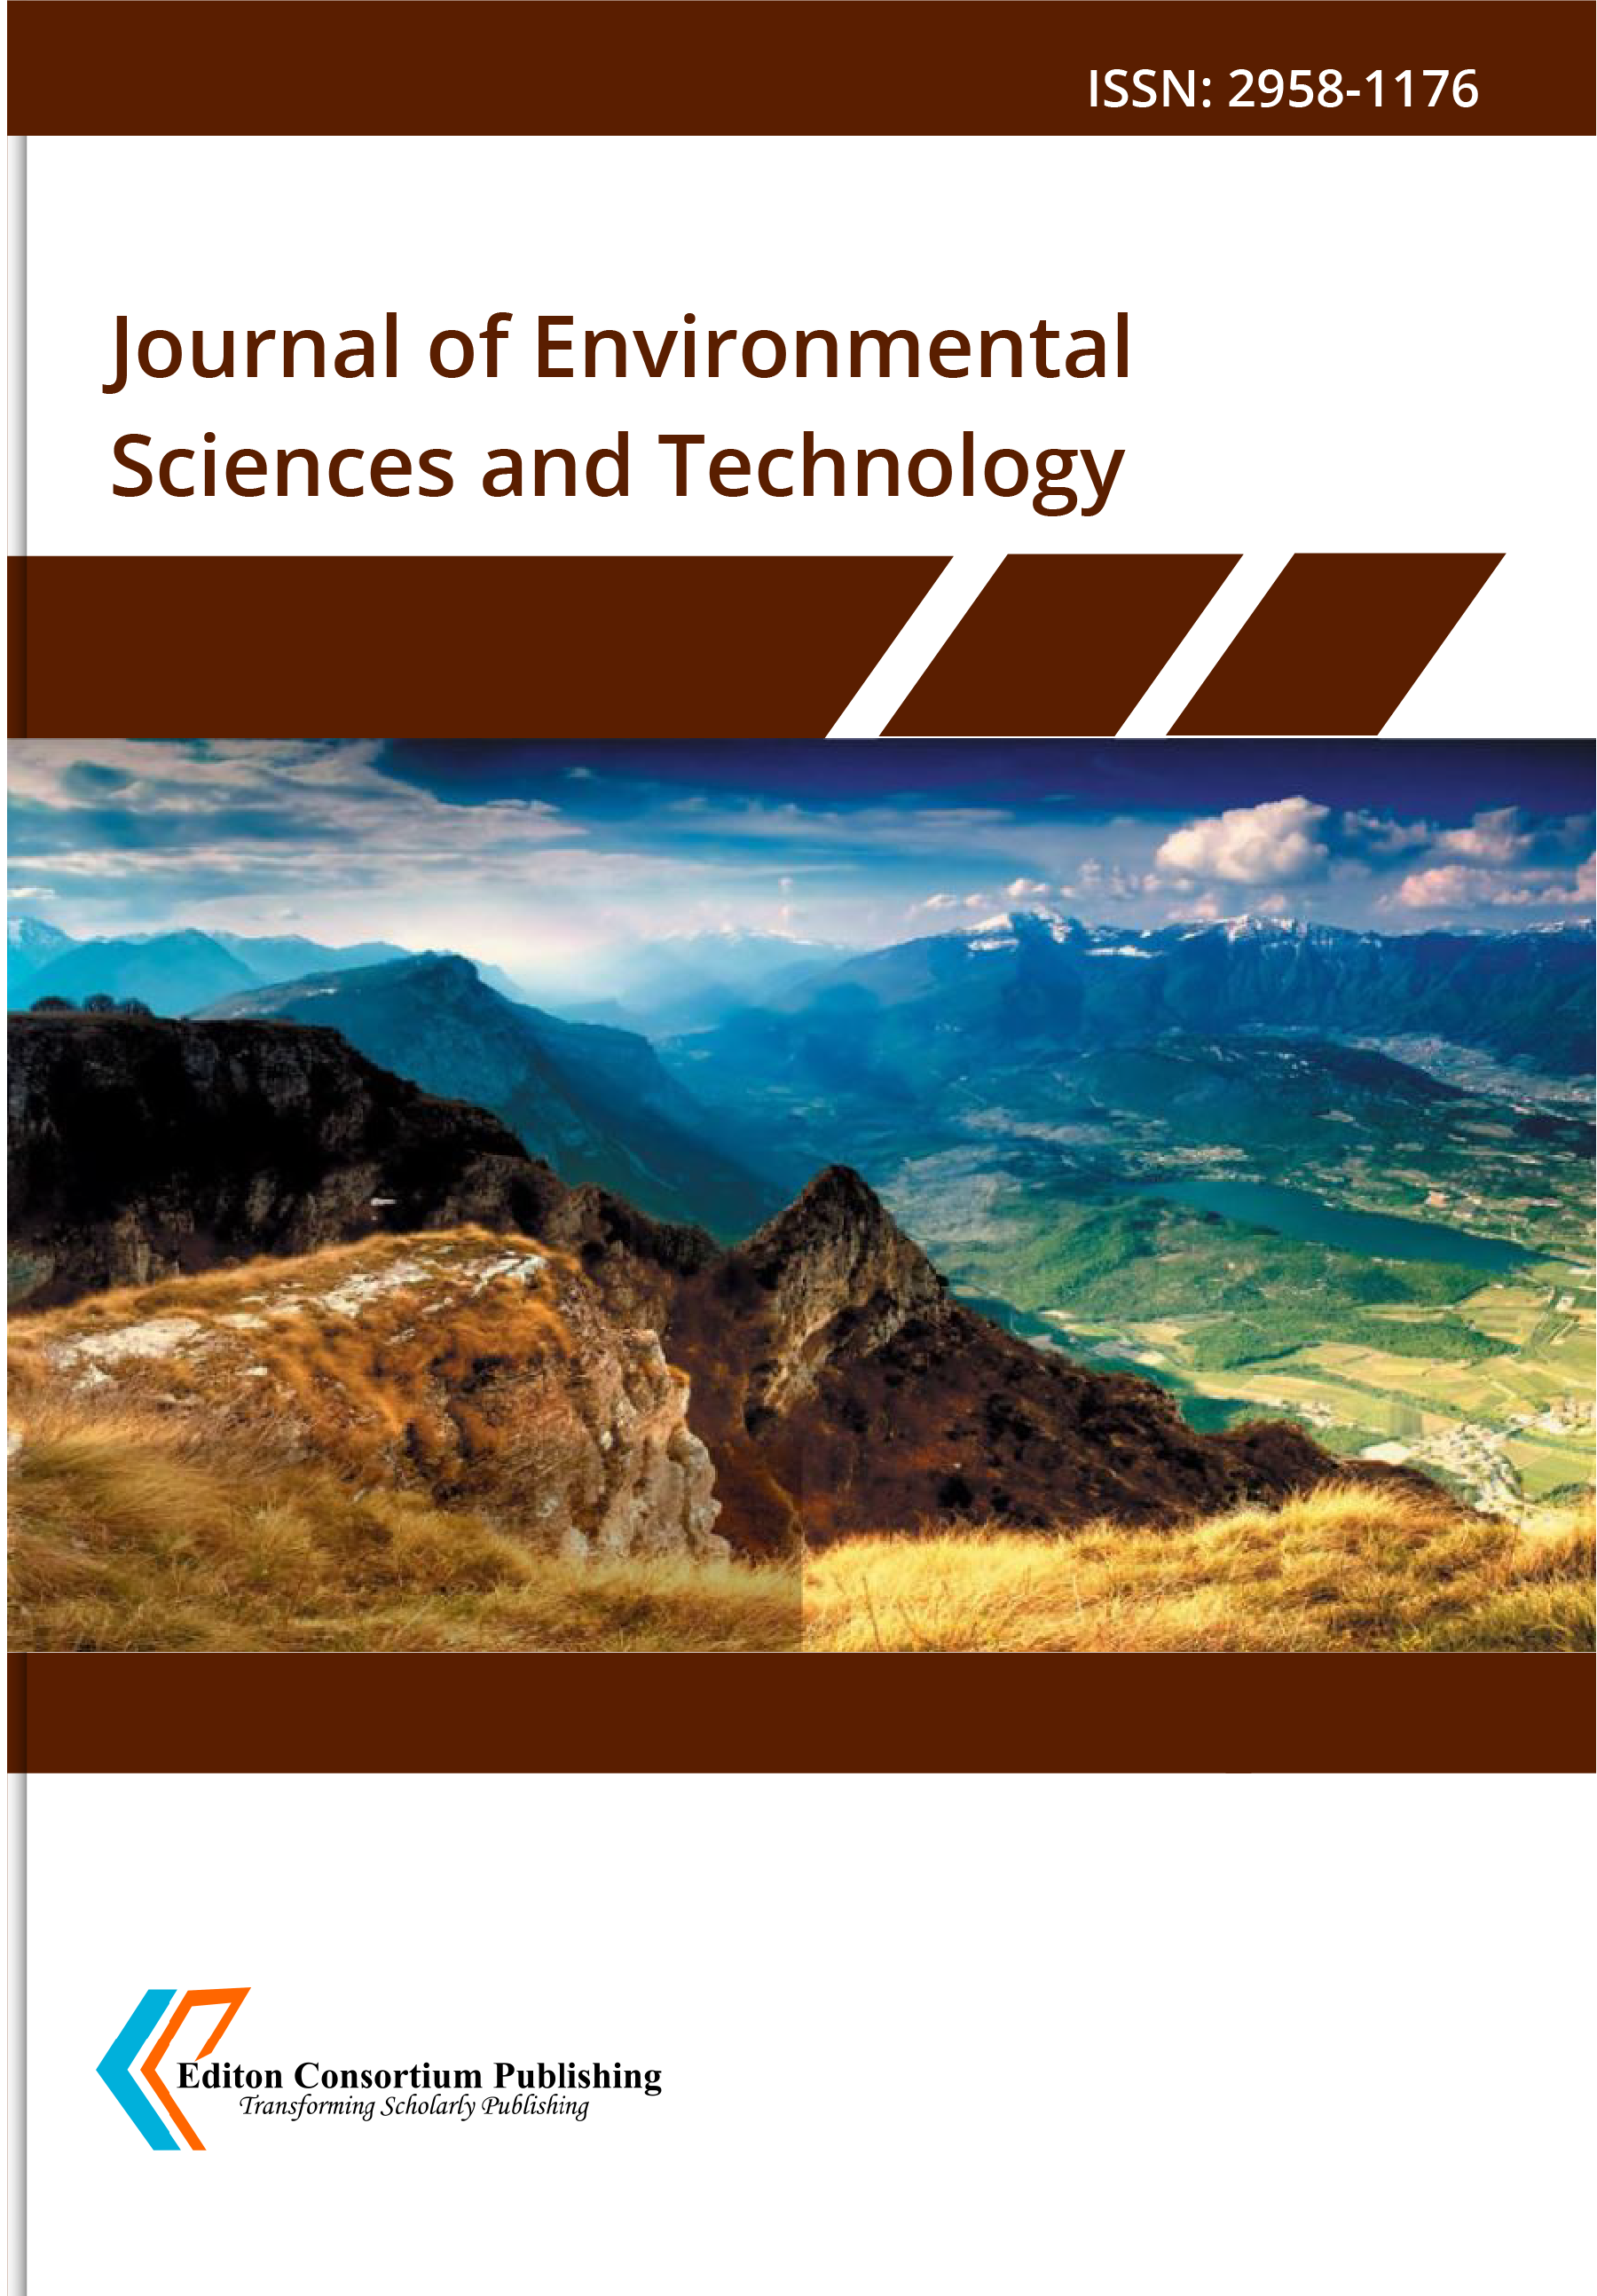  Journal of Environmental Sciences and Technology